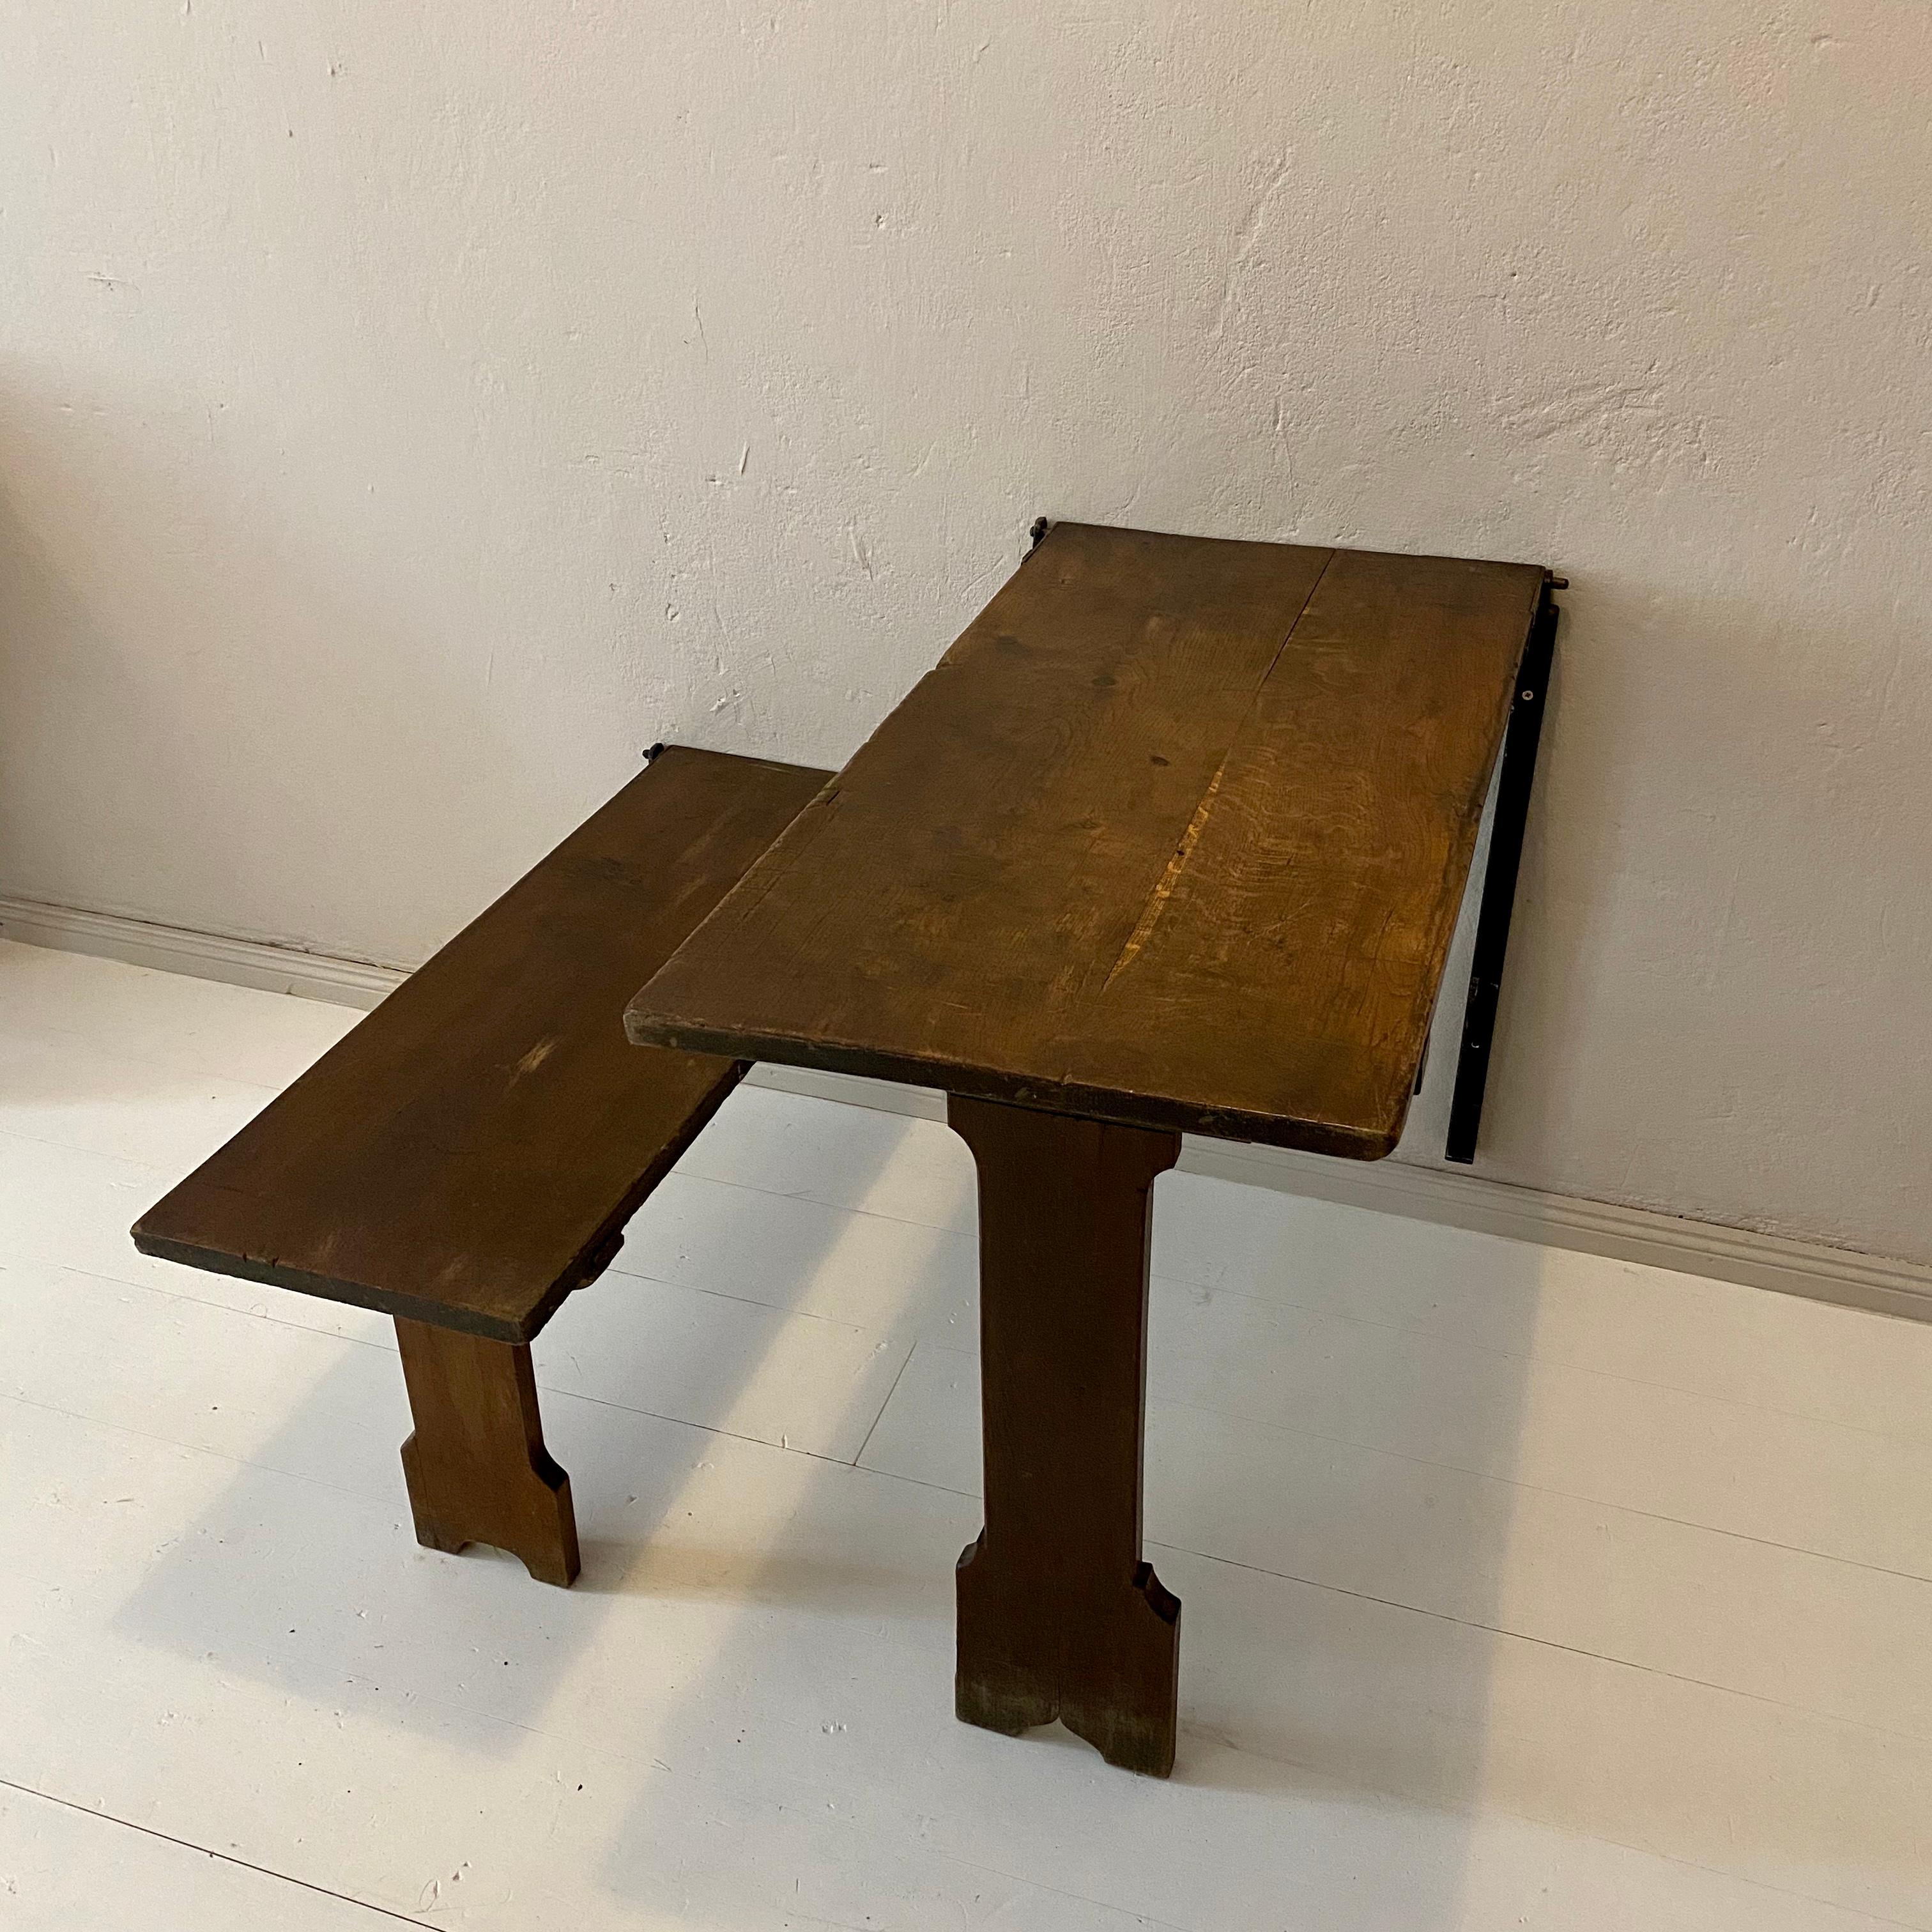 This German Art Deco Wabi Sabi Naive Prison cell table and bench was made in the 1930s for a Berlin Prison.
It is made out of brown oak and the tabletop has got some nice naive carvings like a chess board and a nine men's Morris game.
Beautiful